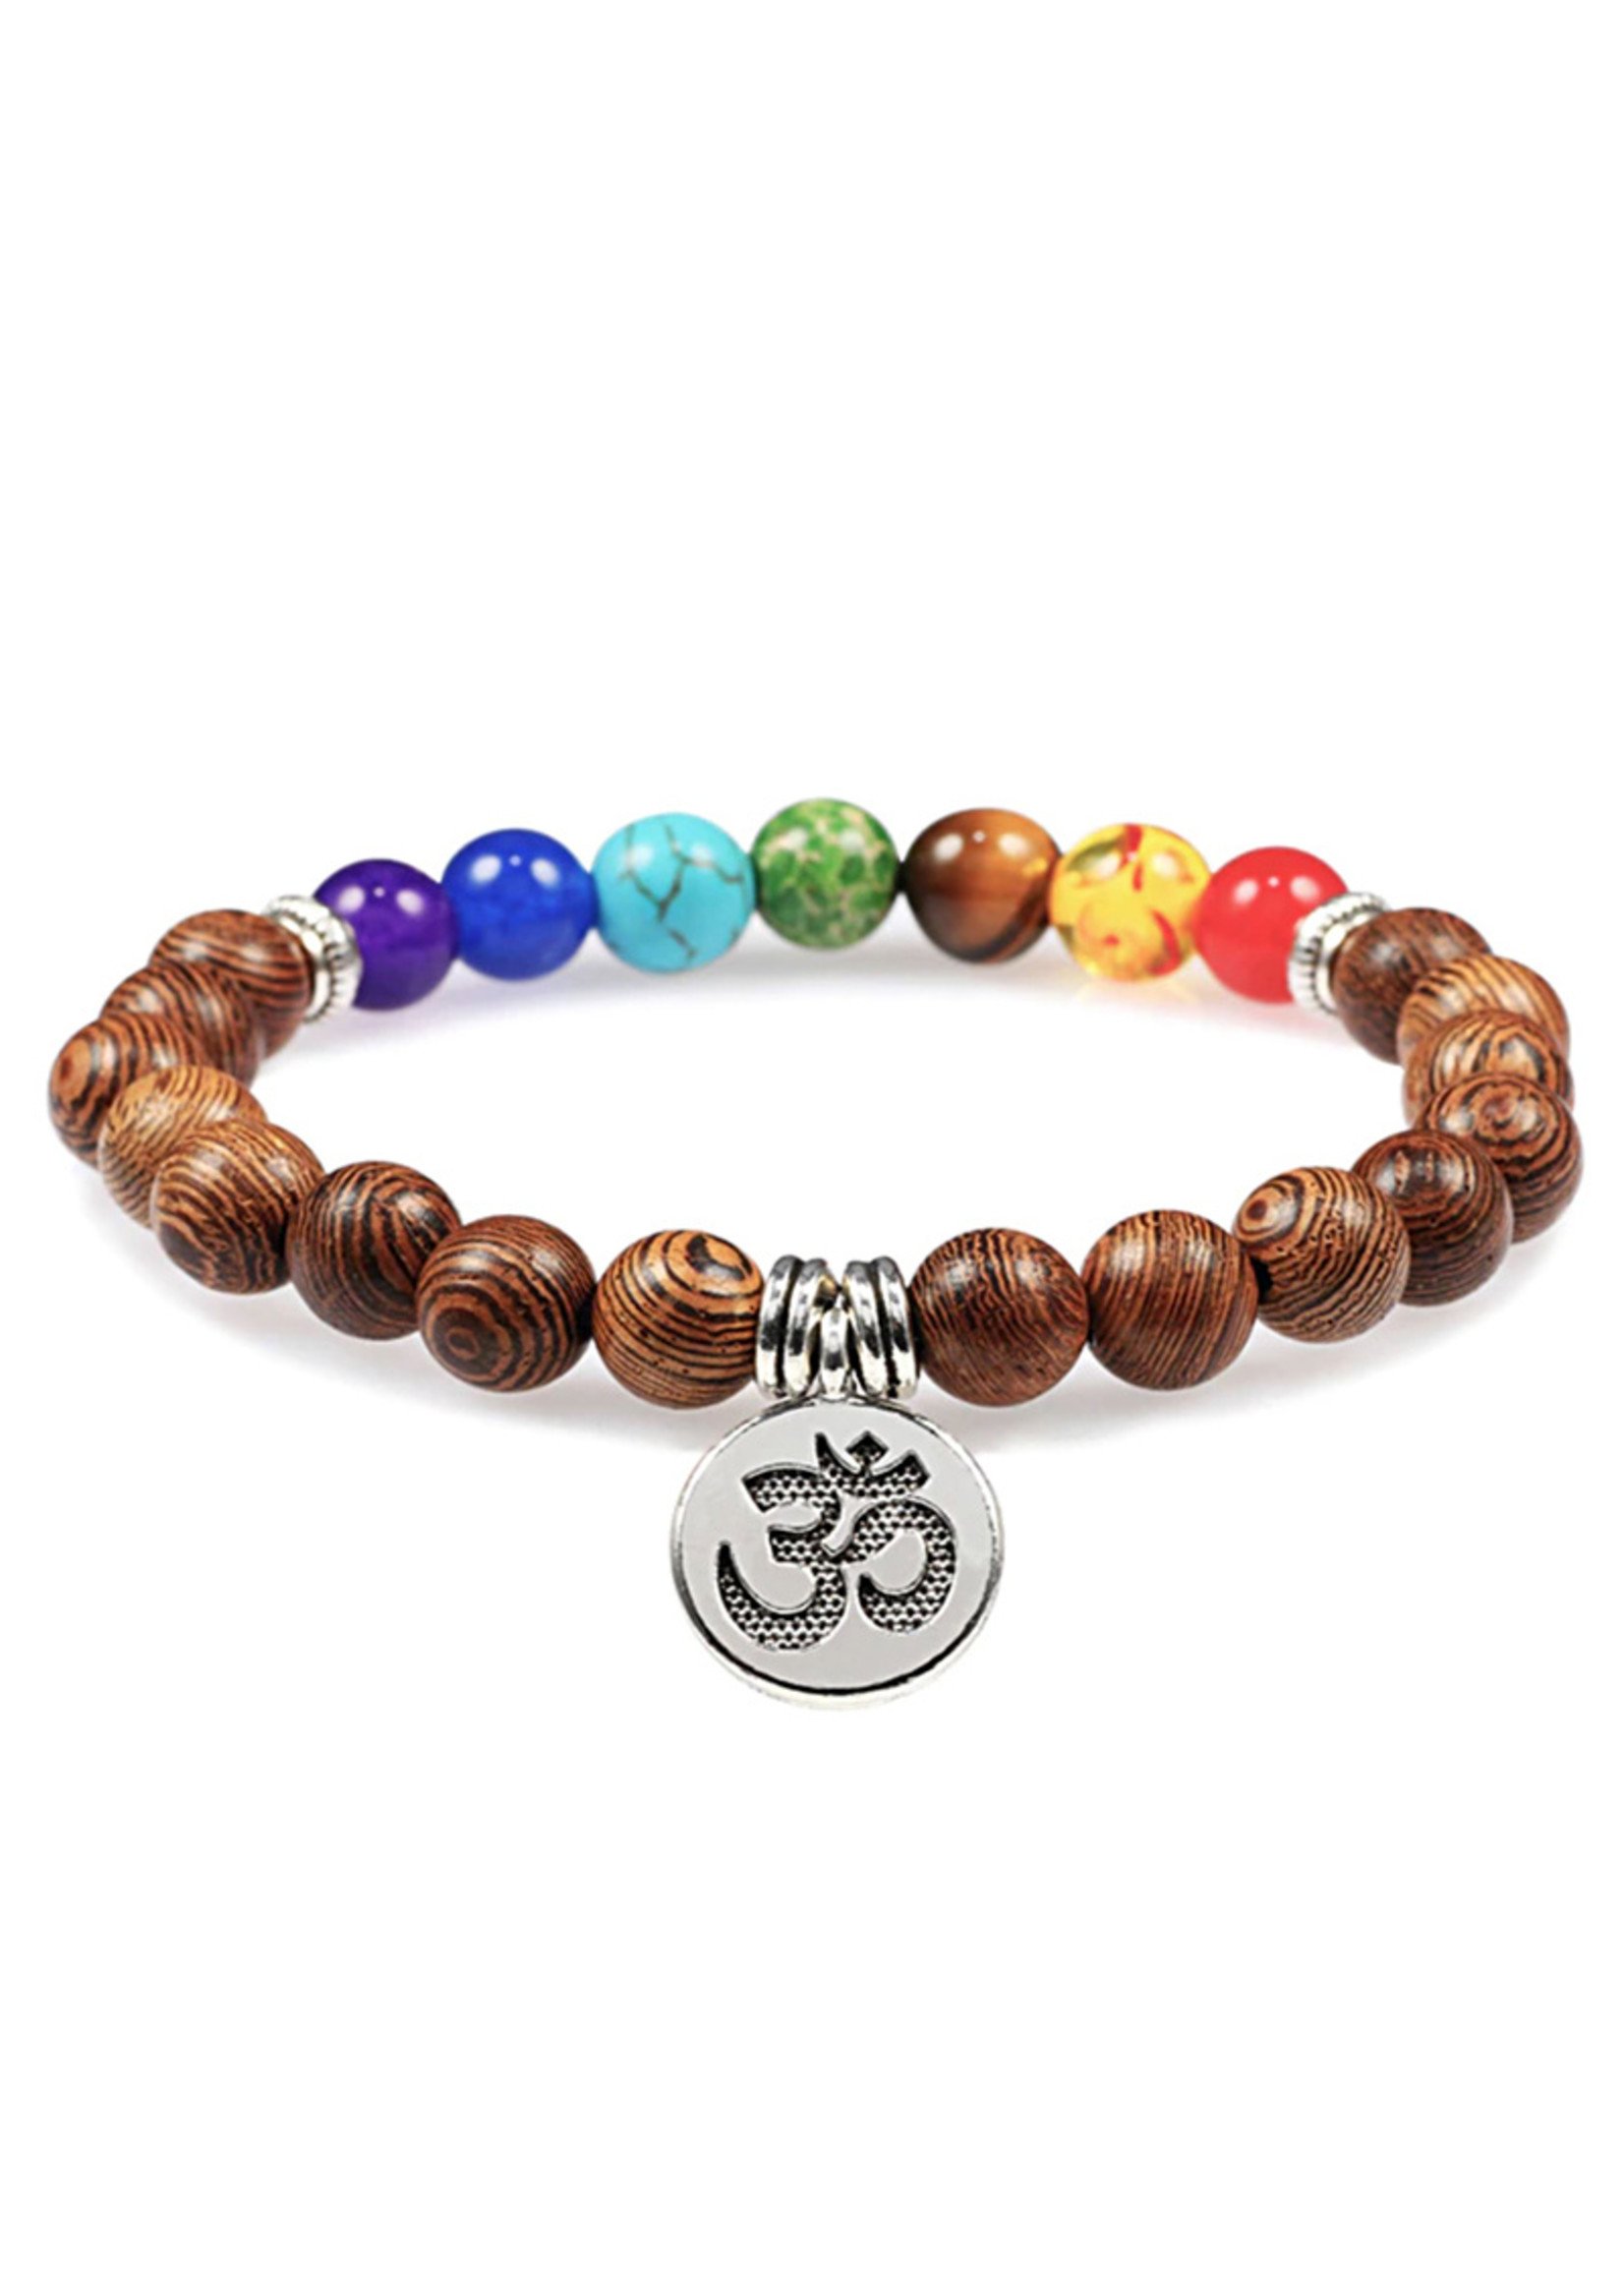 Wooden Bracelet With 7 Chakras And Om, Brown